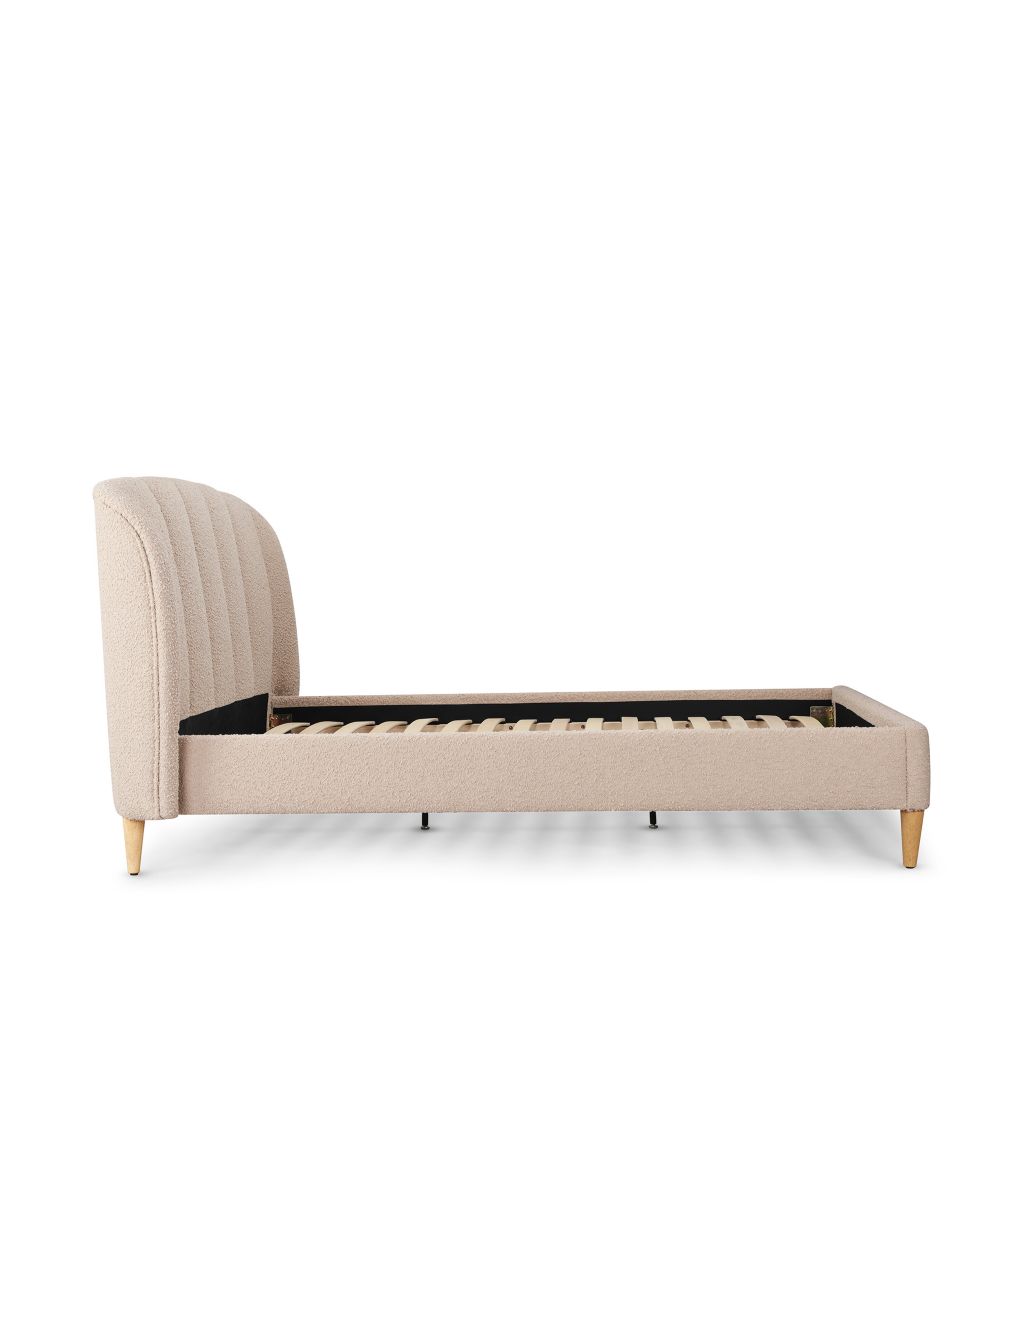 Cassis Upholstered Bed 7 of 7